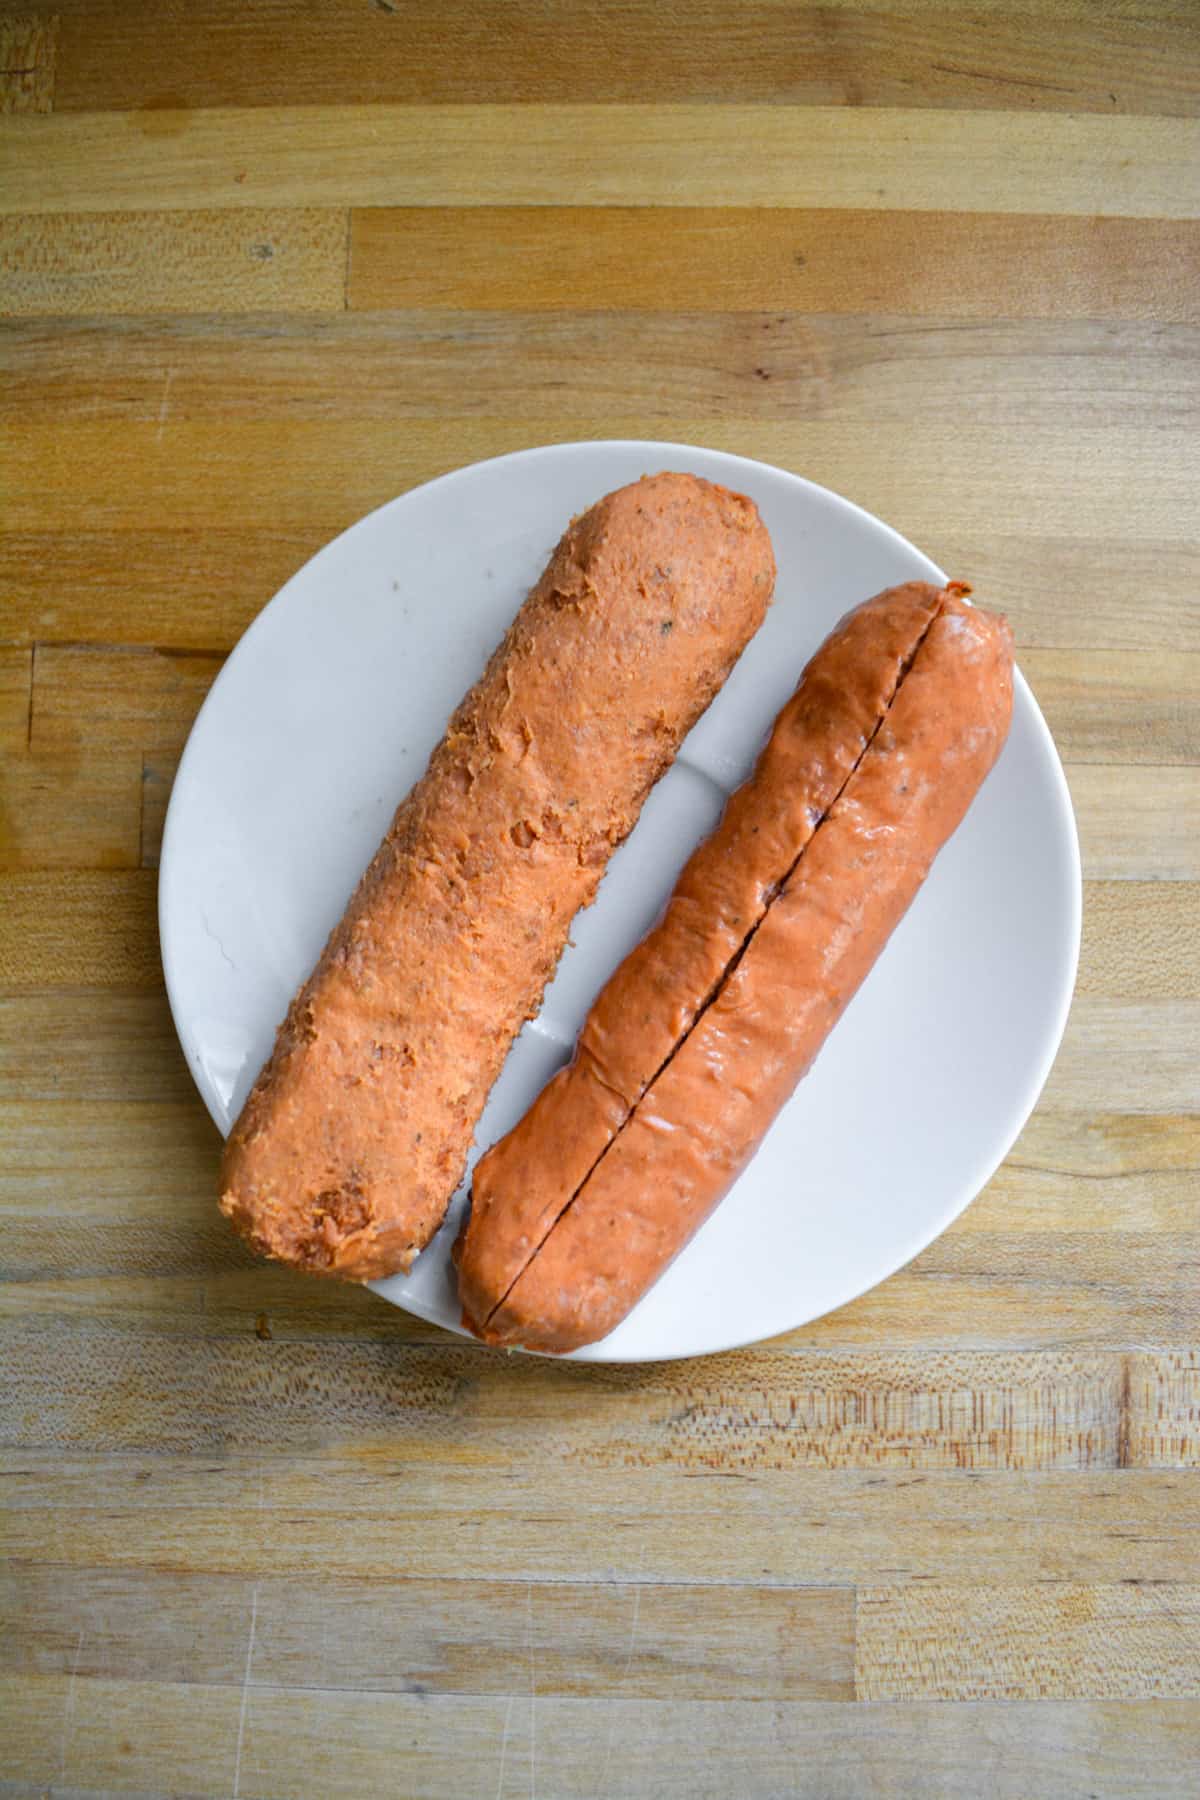 Two vegan Sausages on a small plate, removing the casing.